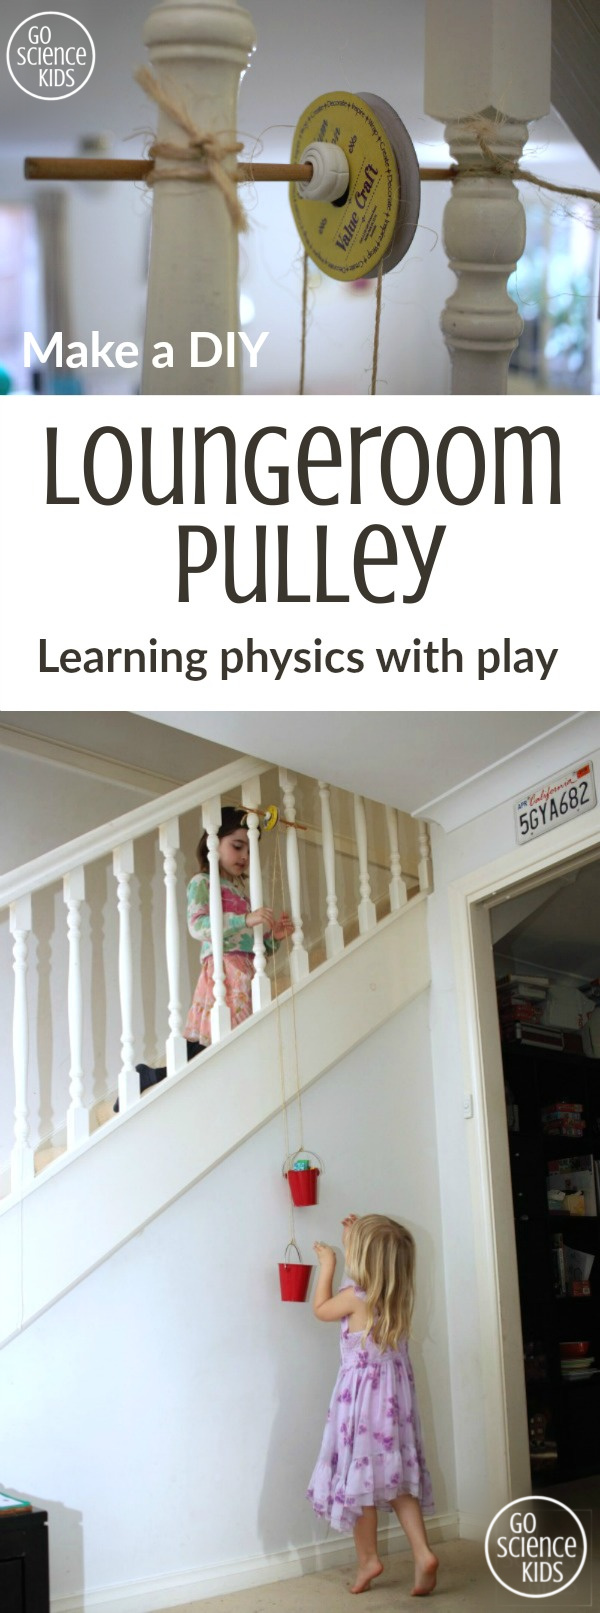 Make a DIY Loungeroom Pulley - fun way for kids to learn about physics and science through play